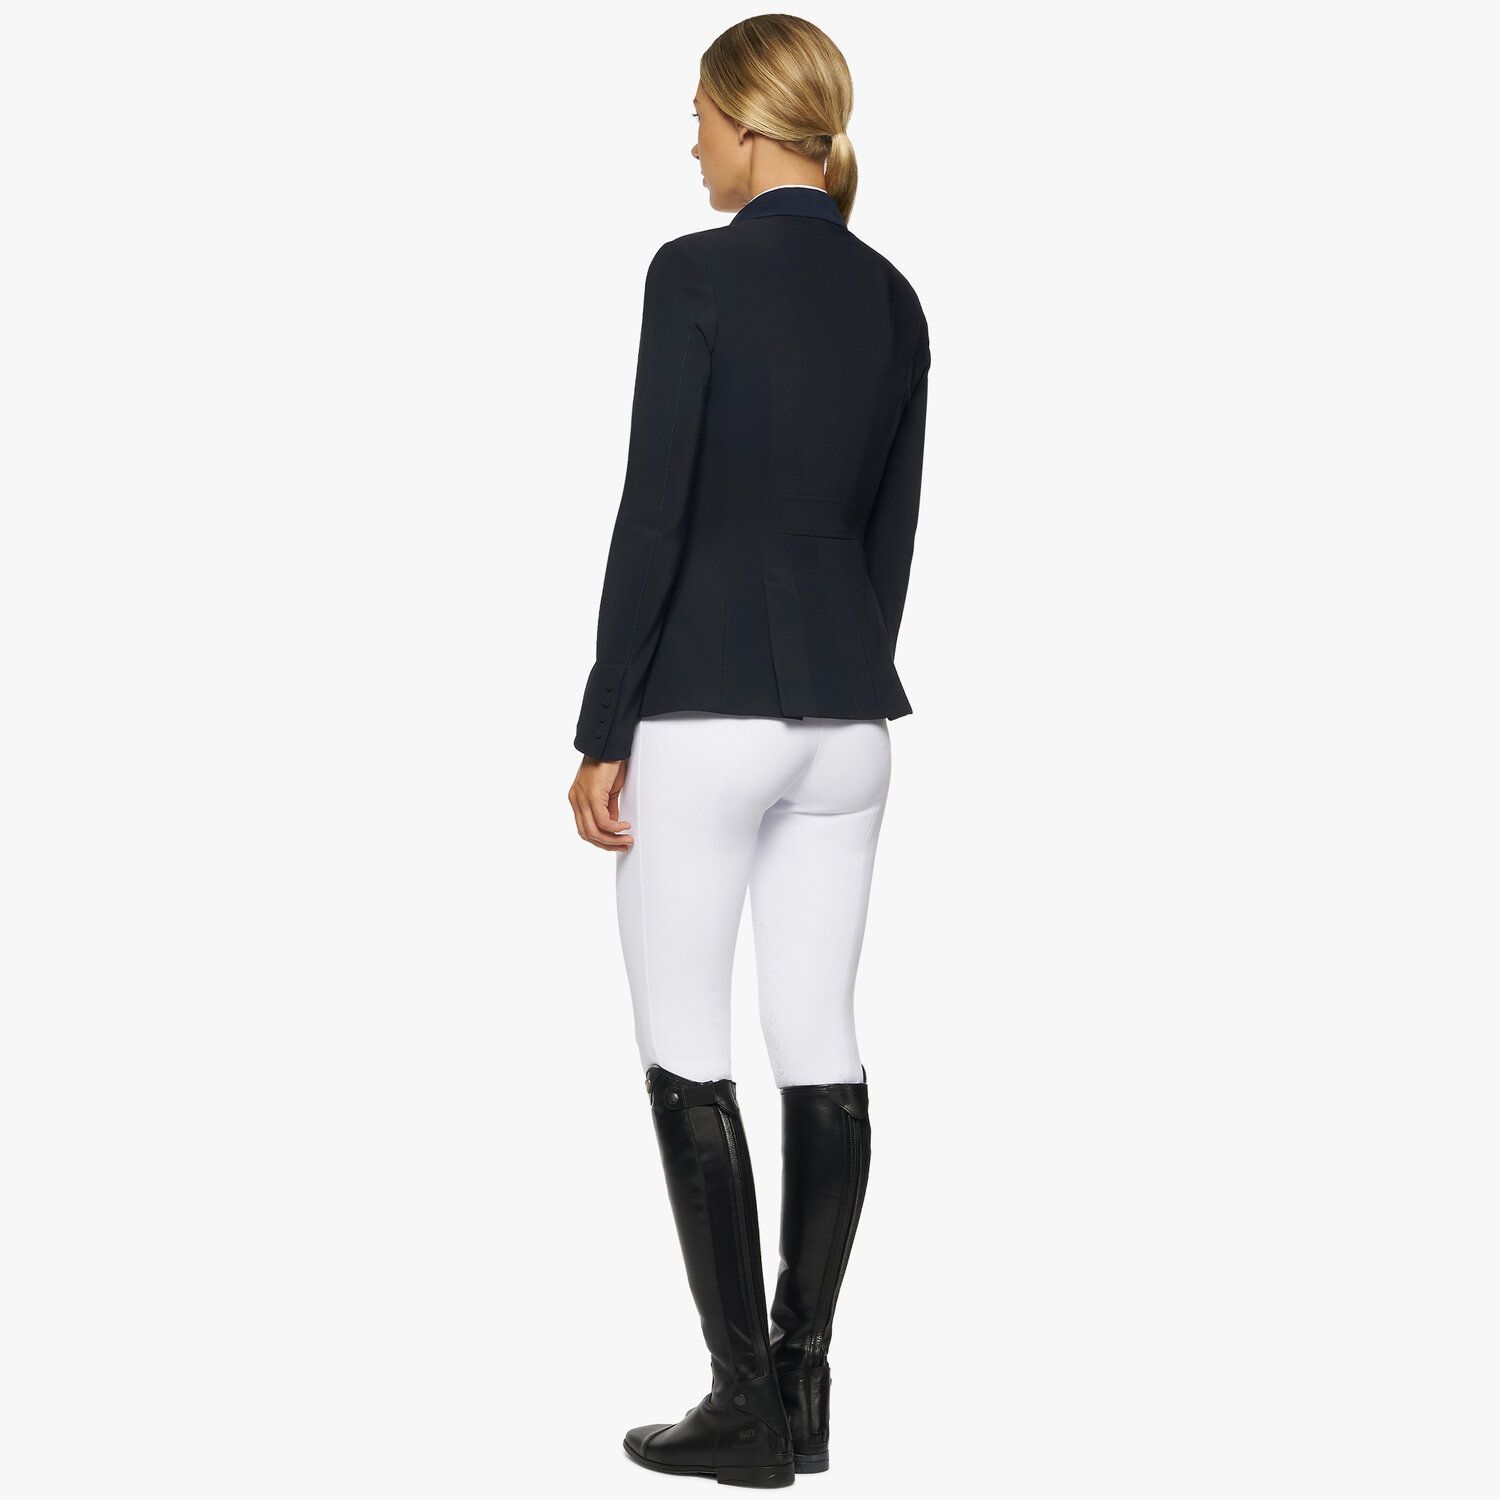 Cavalleria Toscana Women's zip riding jacket with perforated inserts. NAVY-5